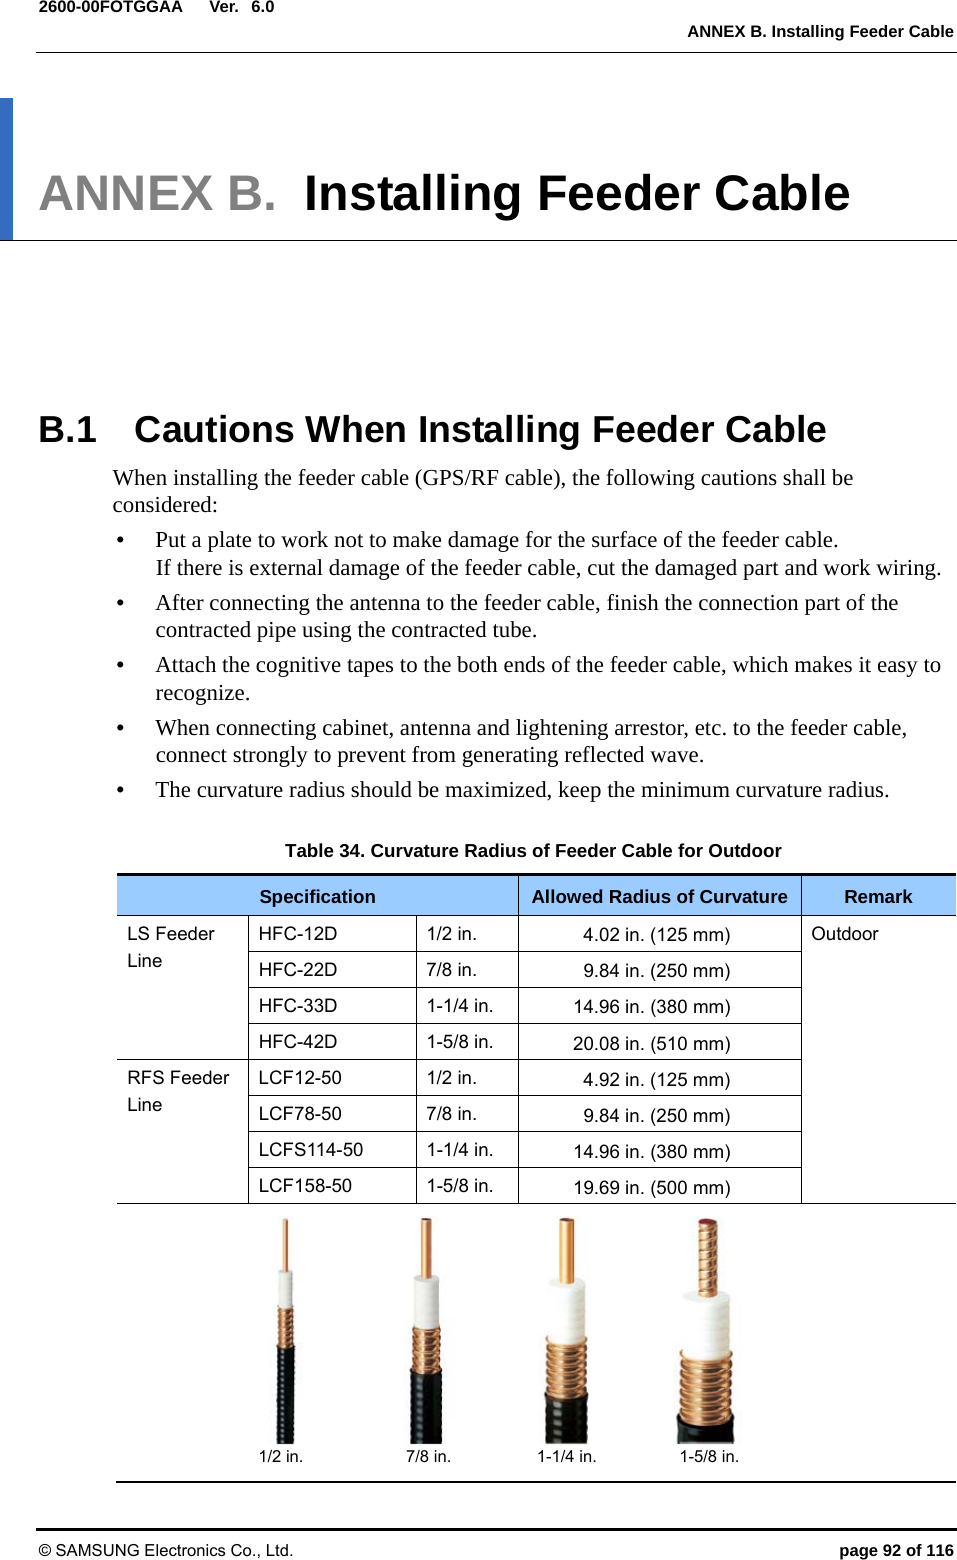  Ver.   ANNEX B. Installing Feeder Cable © SAMSUNG Electronics Co., Ltd.  page 92 of 116 2600-00FOTGGAA 6.0ANNEX B.  Installing Feeder Cable      B.1  Cautions When Installing Feeder Cable When installing the feeder cable (GPS/RF cable), the following cautions shall be considered: y Put a plate to work not to make damage for the surface of the feeder cable.   If there is external damage of the feeder cable, cut the damaged part and work wiring.   y After connecting the antenna to the feeder cable, finish the connection part of the contracted pipe using the contracted tube.   y Attach the cognitive tapes to the both ends of the feeder cable, which makes it easy to recognize. y When connecting cabinet, antenna and lightening arrestor, etc. to the feeder cable, connect strongly to prevent from generating reflected wave. y The curvature radius should be maximized, keep the minimum curvature radius.  Table 34. Curvature Radius of Feeder Cable for Outdoor Specification  Allowed Radius of Curvature  Remark LS Feeder Line HFC-12D 1/2 in.  4.02 in. (125 mm)  Outdoor HFC-22D 7/8 in.  9.84 in. (250 mm) HFC-33D 1-1/4 in. 14.96 in. (380 mm) HFC-42D 1-5/8 in. 20.08 in. (510 mm) RFS Feeder Line LCF12-50 1/2 in.  4.92 in. (125 mm) LCF78-50 7/8 in.  9.84 in. (250 mm) LCFS114-50 1-1/4 in.  14.96 in. (380 mm) LCF158-50 1-5/8 in.  19.69 in. (500 mm)           1/2 in.  7/8 in. 1-1/4 in. 1-5/8 in.